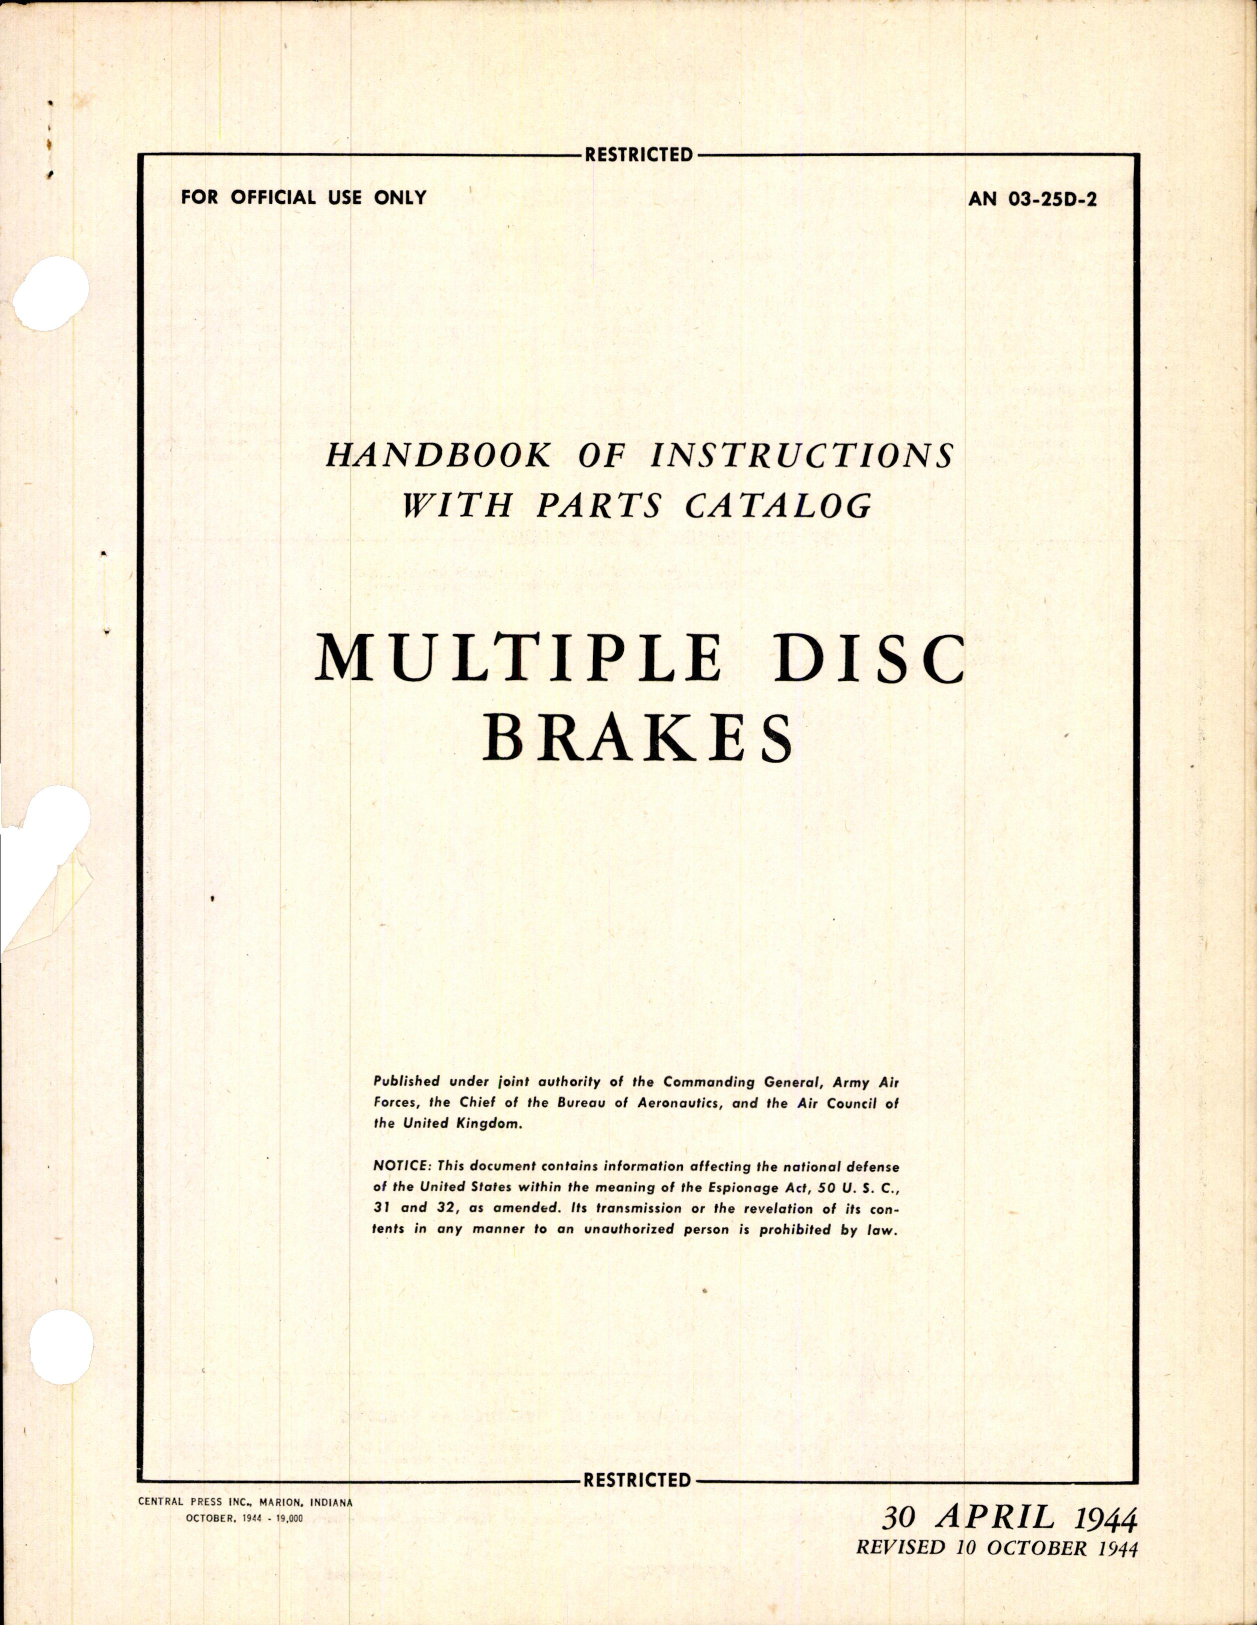 Sample page 3 from AirCorps Library document: Instructions with Parts Catalog for Multiple Disk Brakes